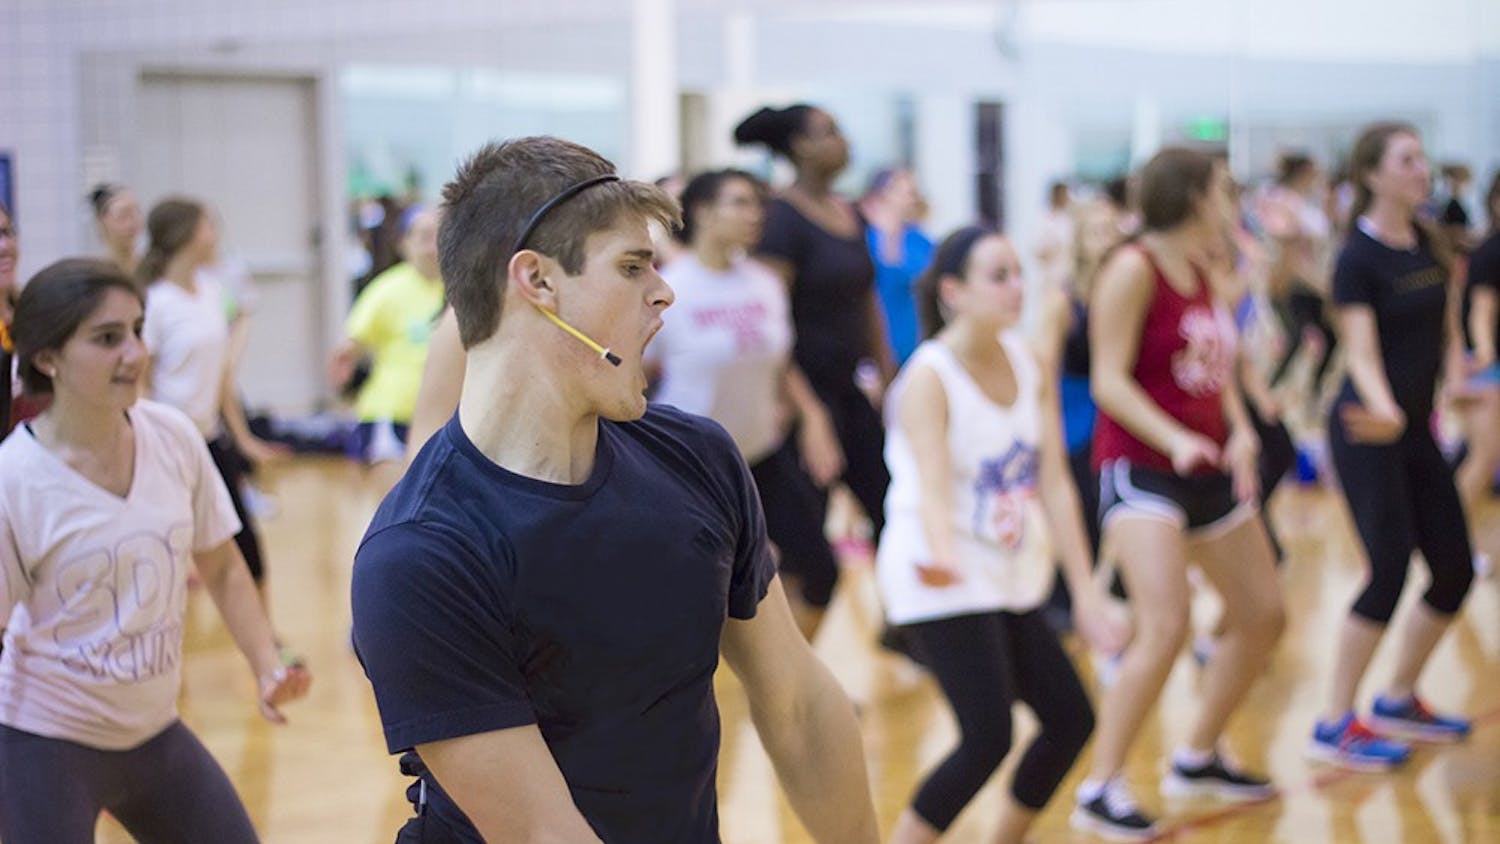 Caleb Marshall leads a Cardio Hip Hop session at the Student Recreational Sports Center in 2014.